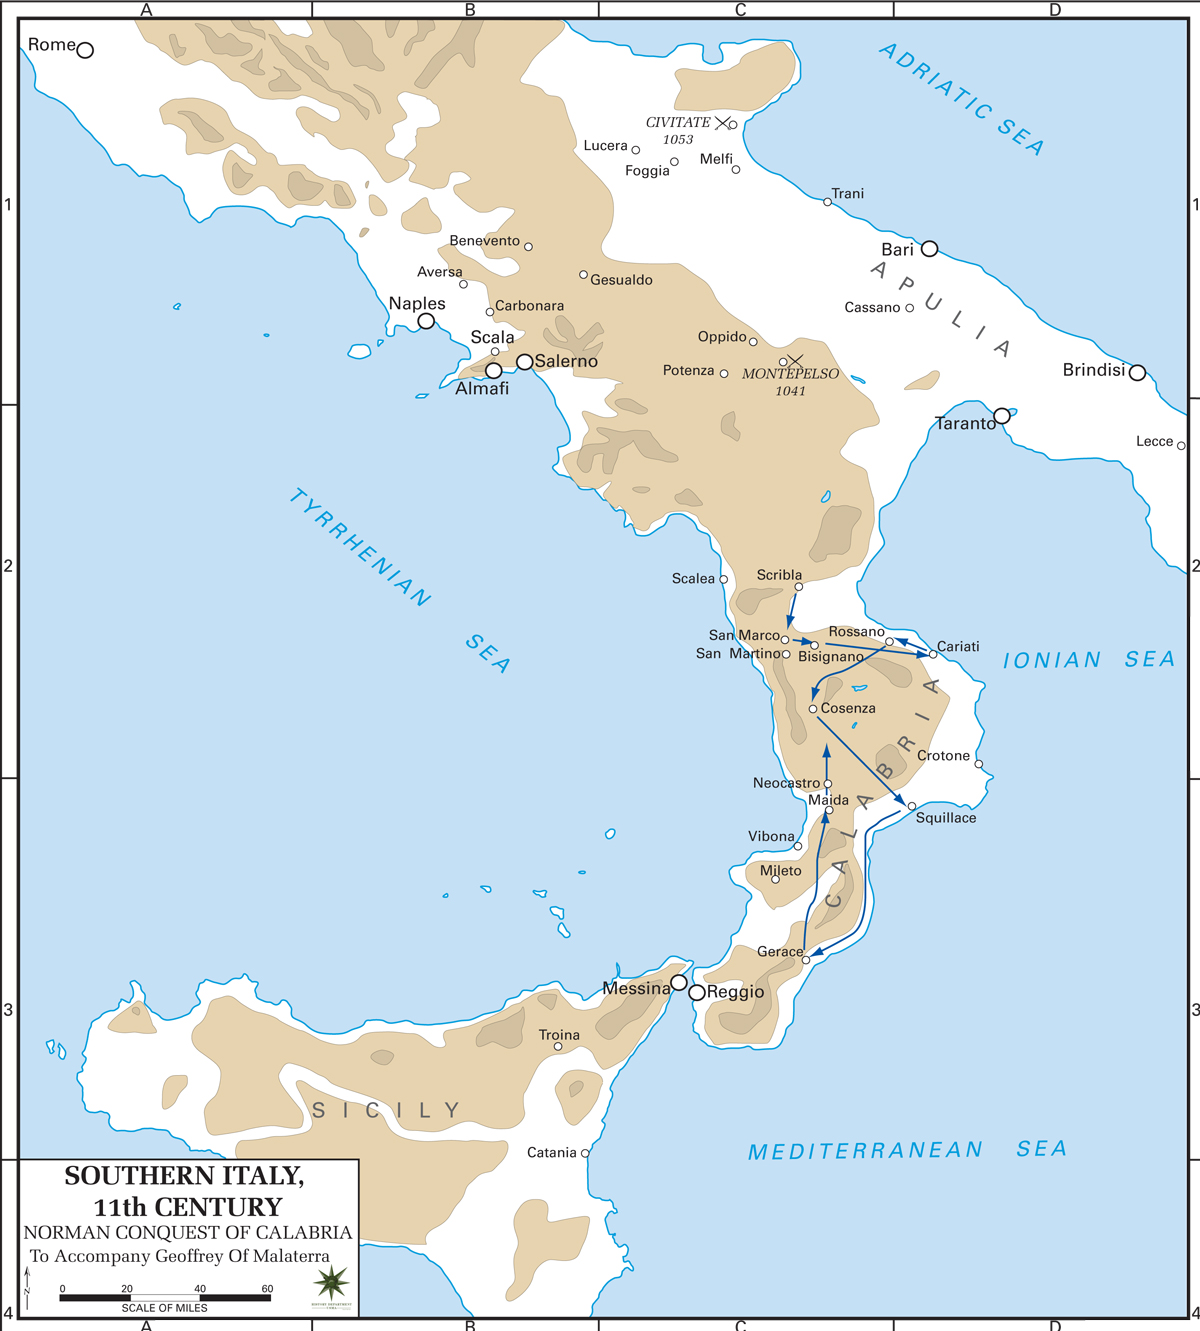 Map of Southern Italy in the 11th Century - Normans in Calabria